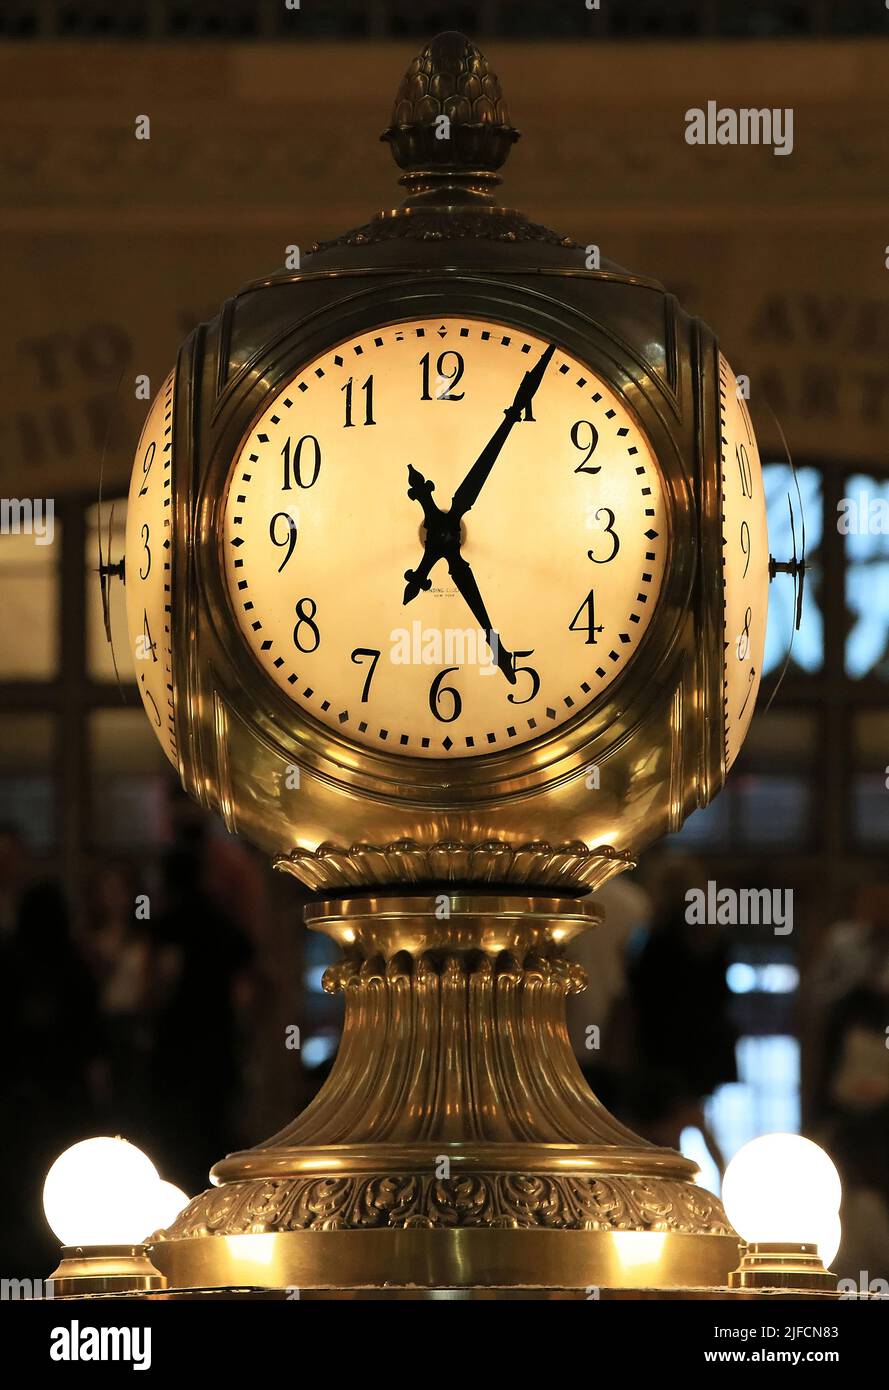 Close-up of the famous clock in the main hall of Grand Central Station Terminal, Manhattan, New York City, New York, USA. Stock Photo